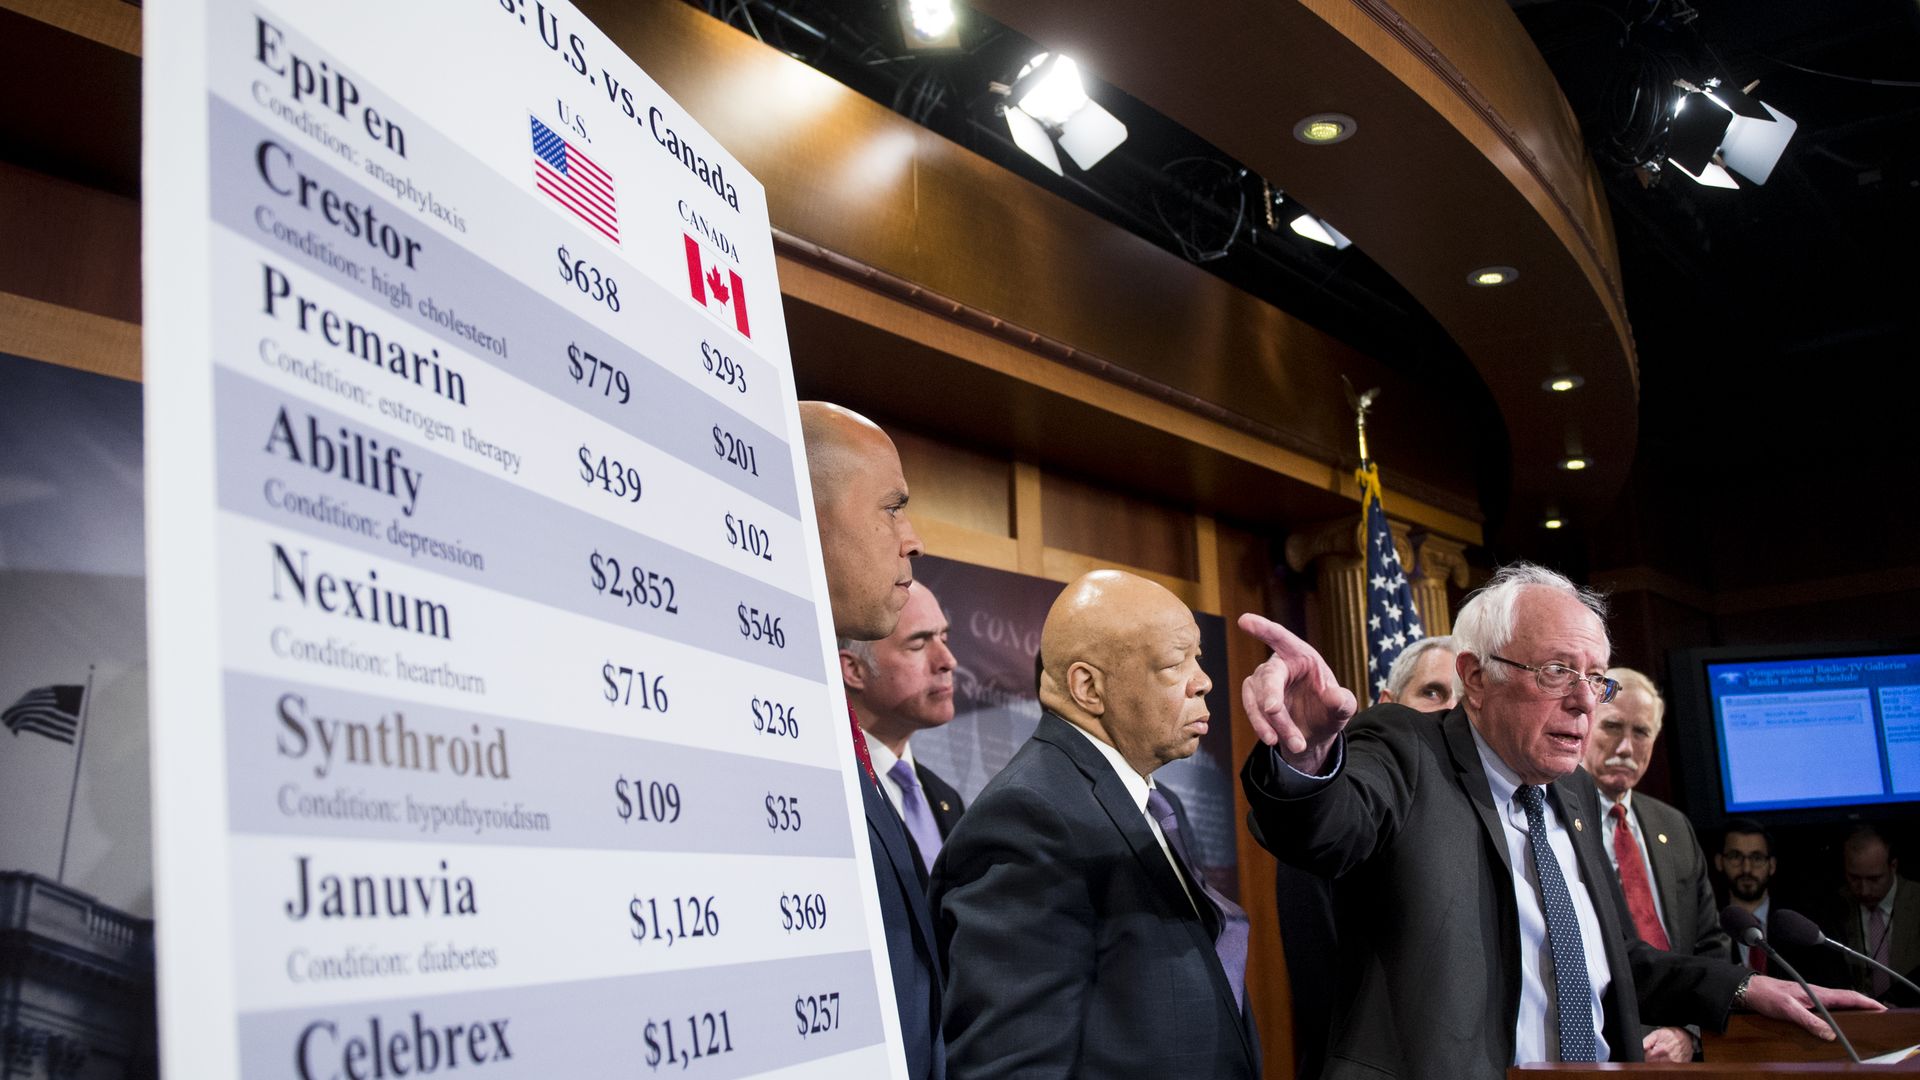 Bernie Sanders pointing at a poster with drug prices.